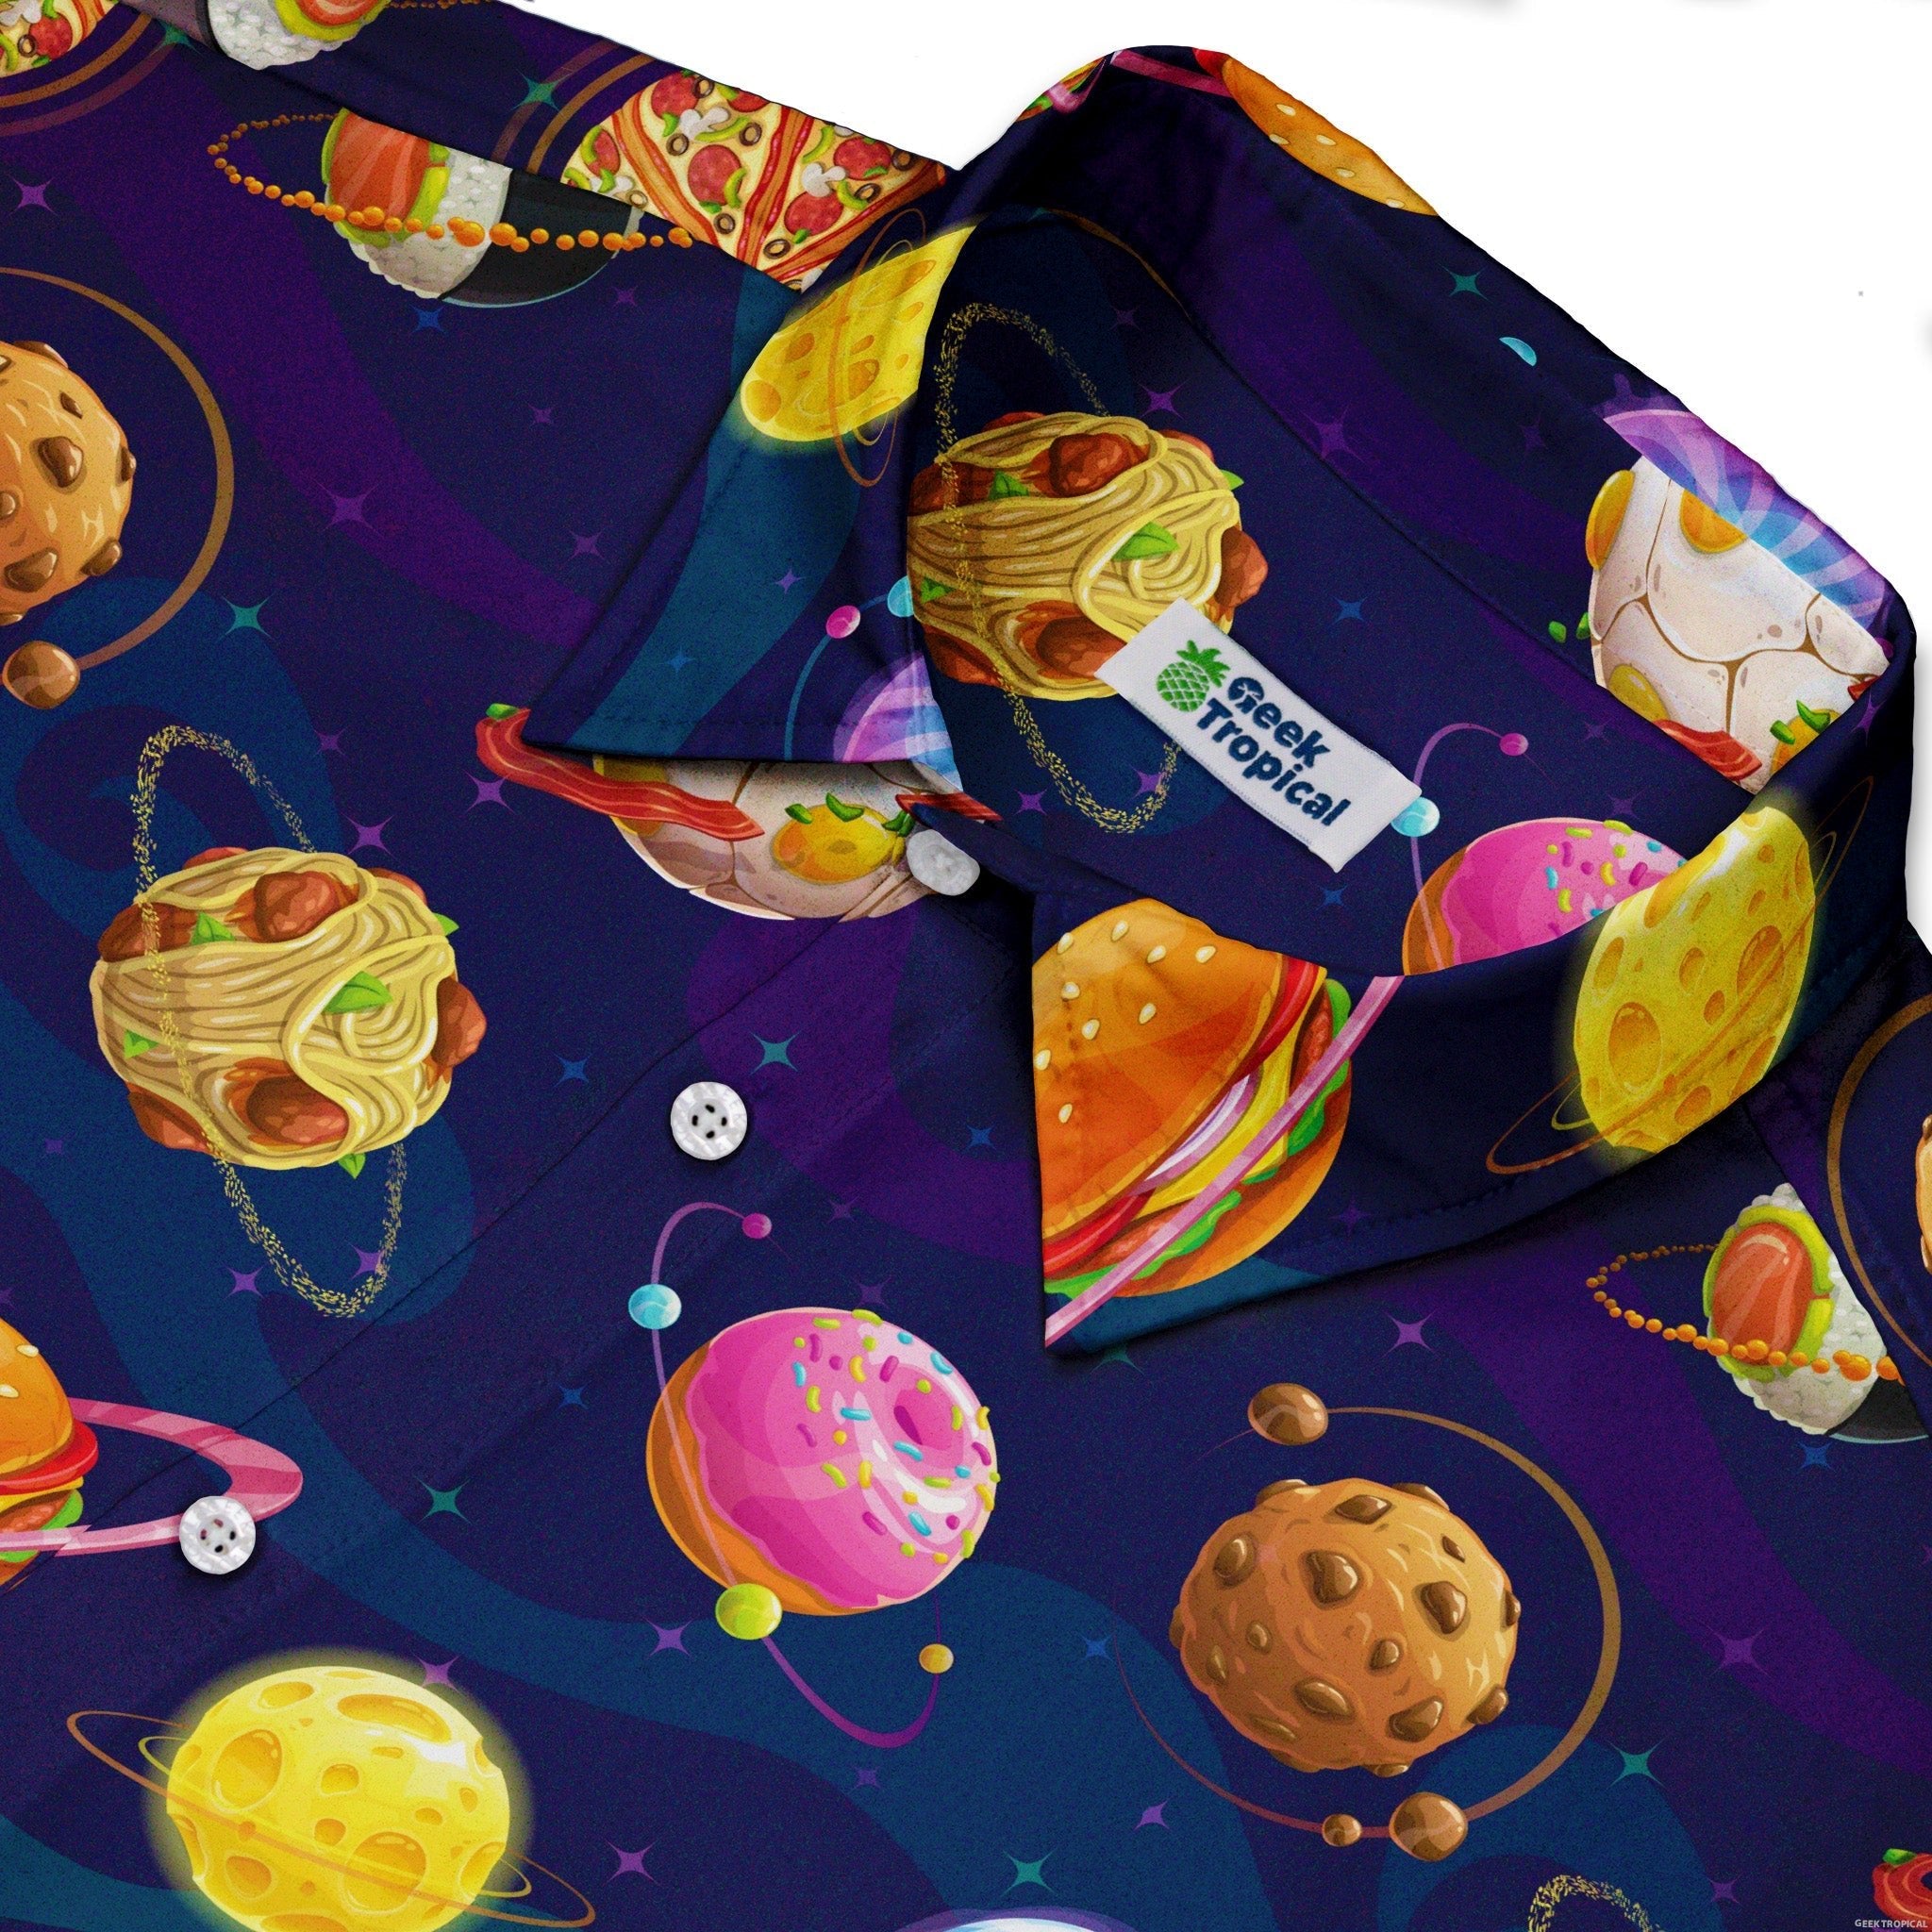 Cartoon Planet Food Space Blue Purple Button Up Shirt - adult sizing - Maximalist Patterns - outer space & astronaut print